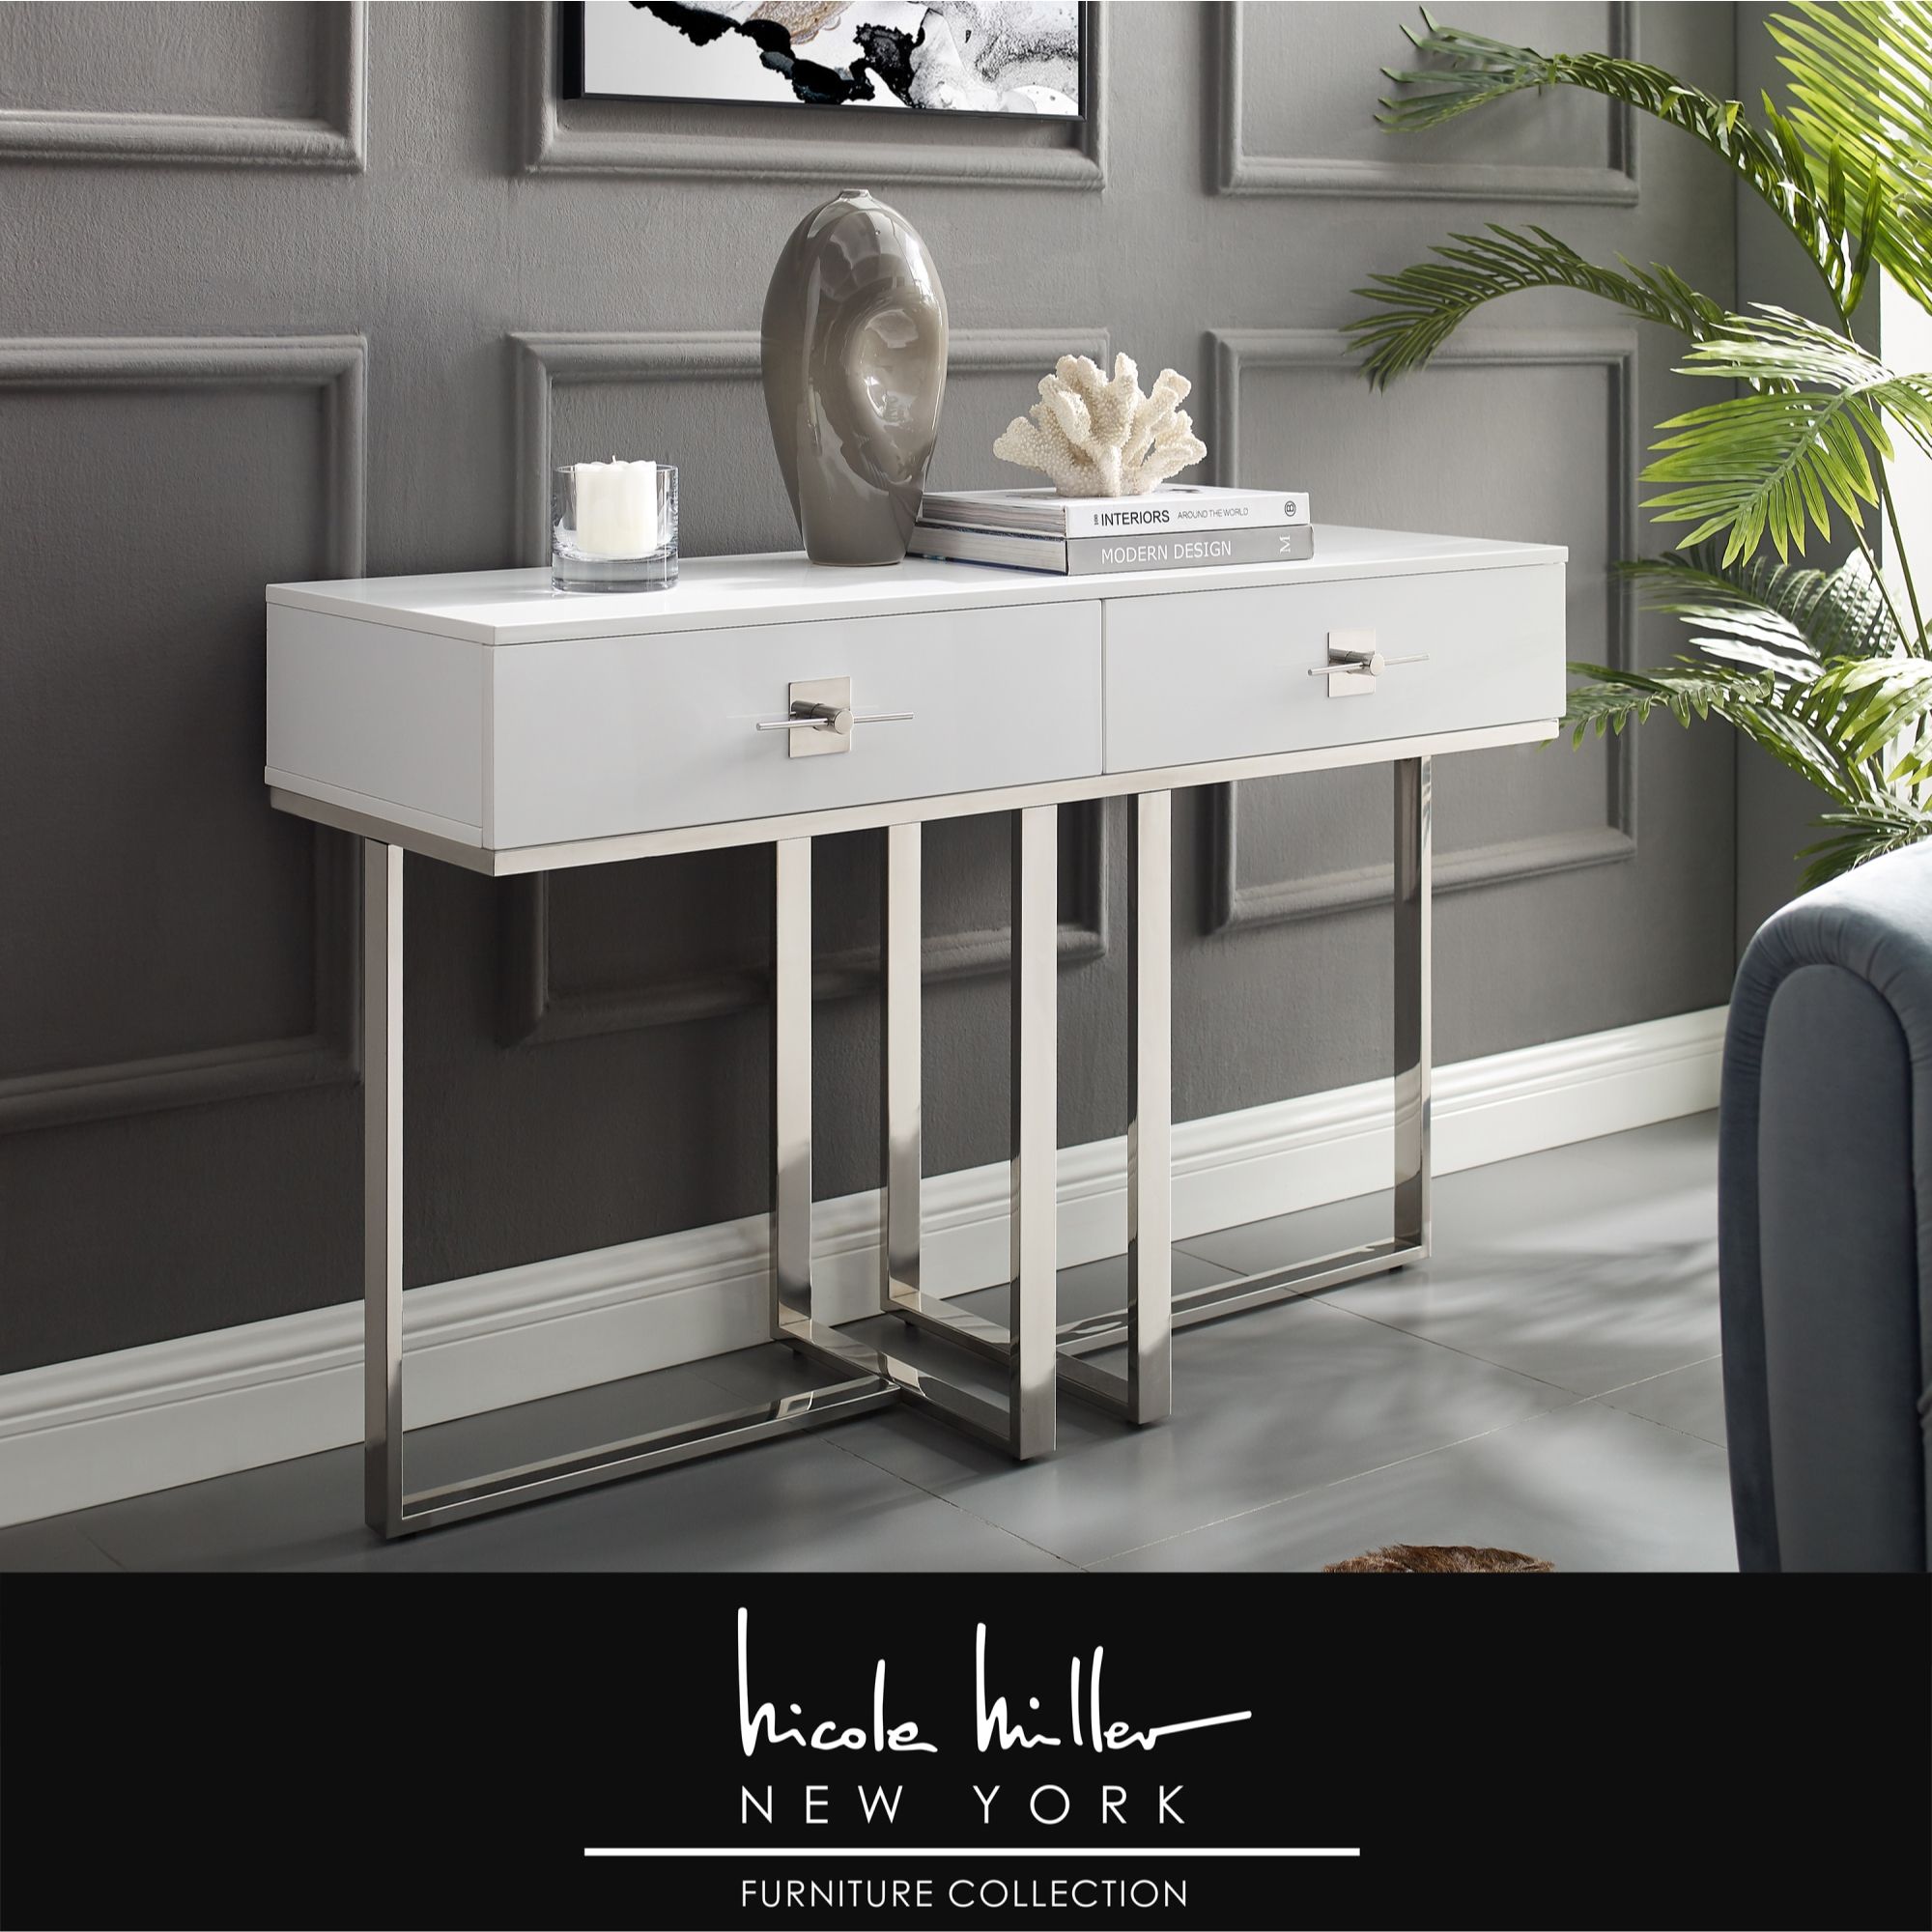 Nicole Miller Meli Console Table 2 Drawers Hight Gloss Inside Chrome Console Tables (Photo 3 of 20)